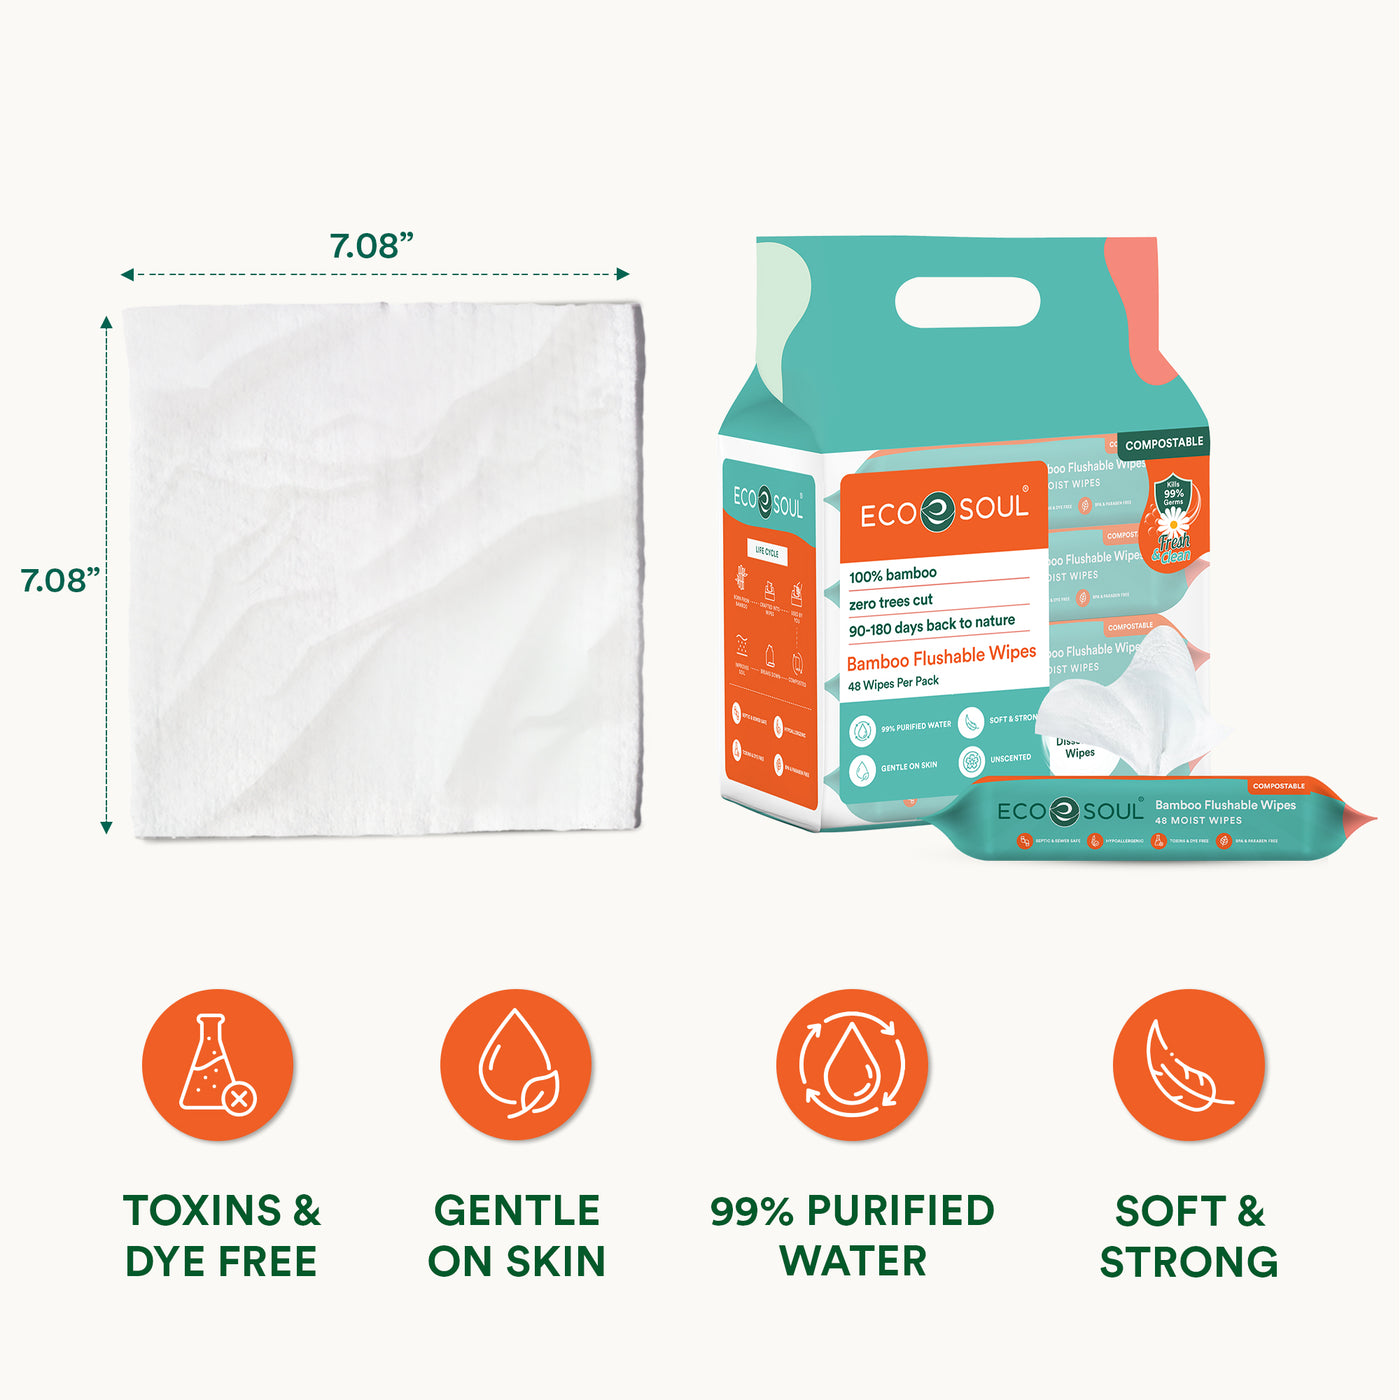 Showcasing Bamboo Premium Flushable Wipes length and features.